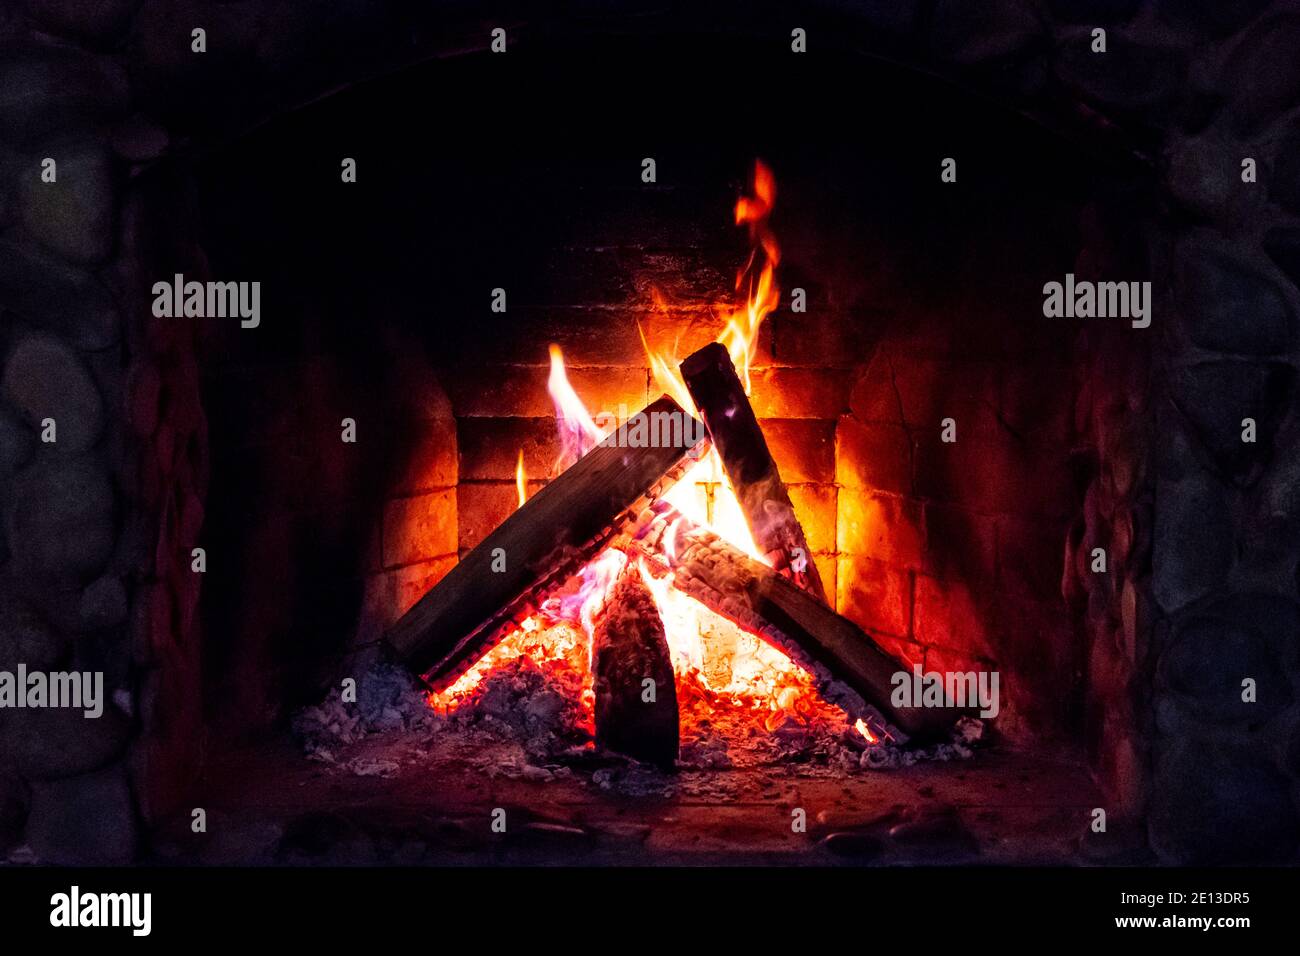 Flames in the fireplace. Burning wood. Brick fireplace Stock Photo